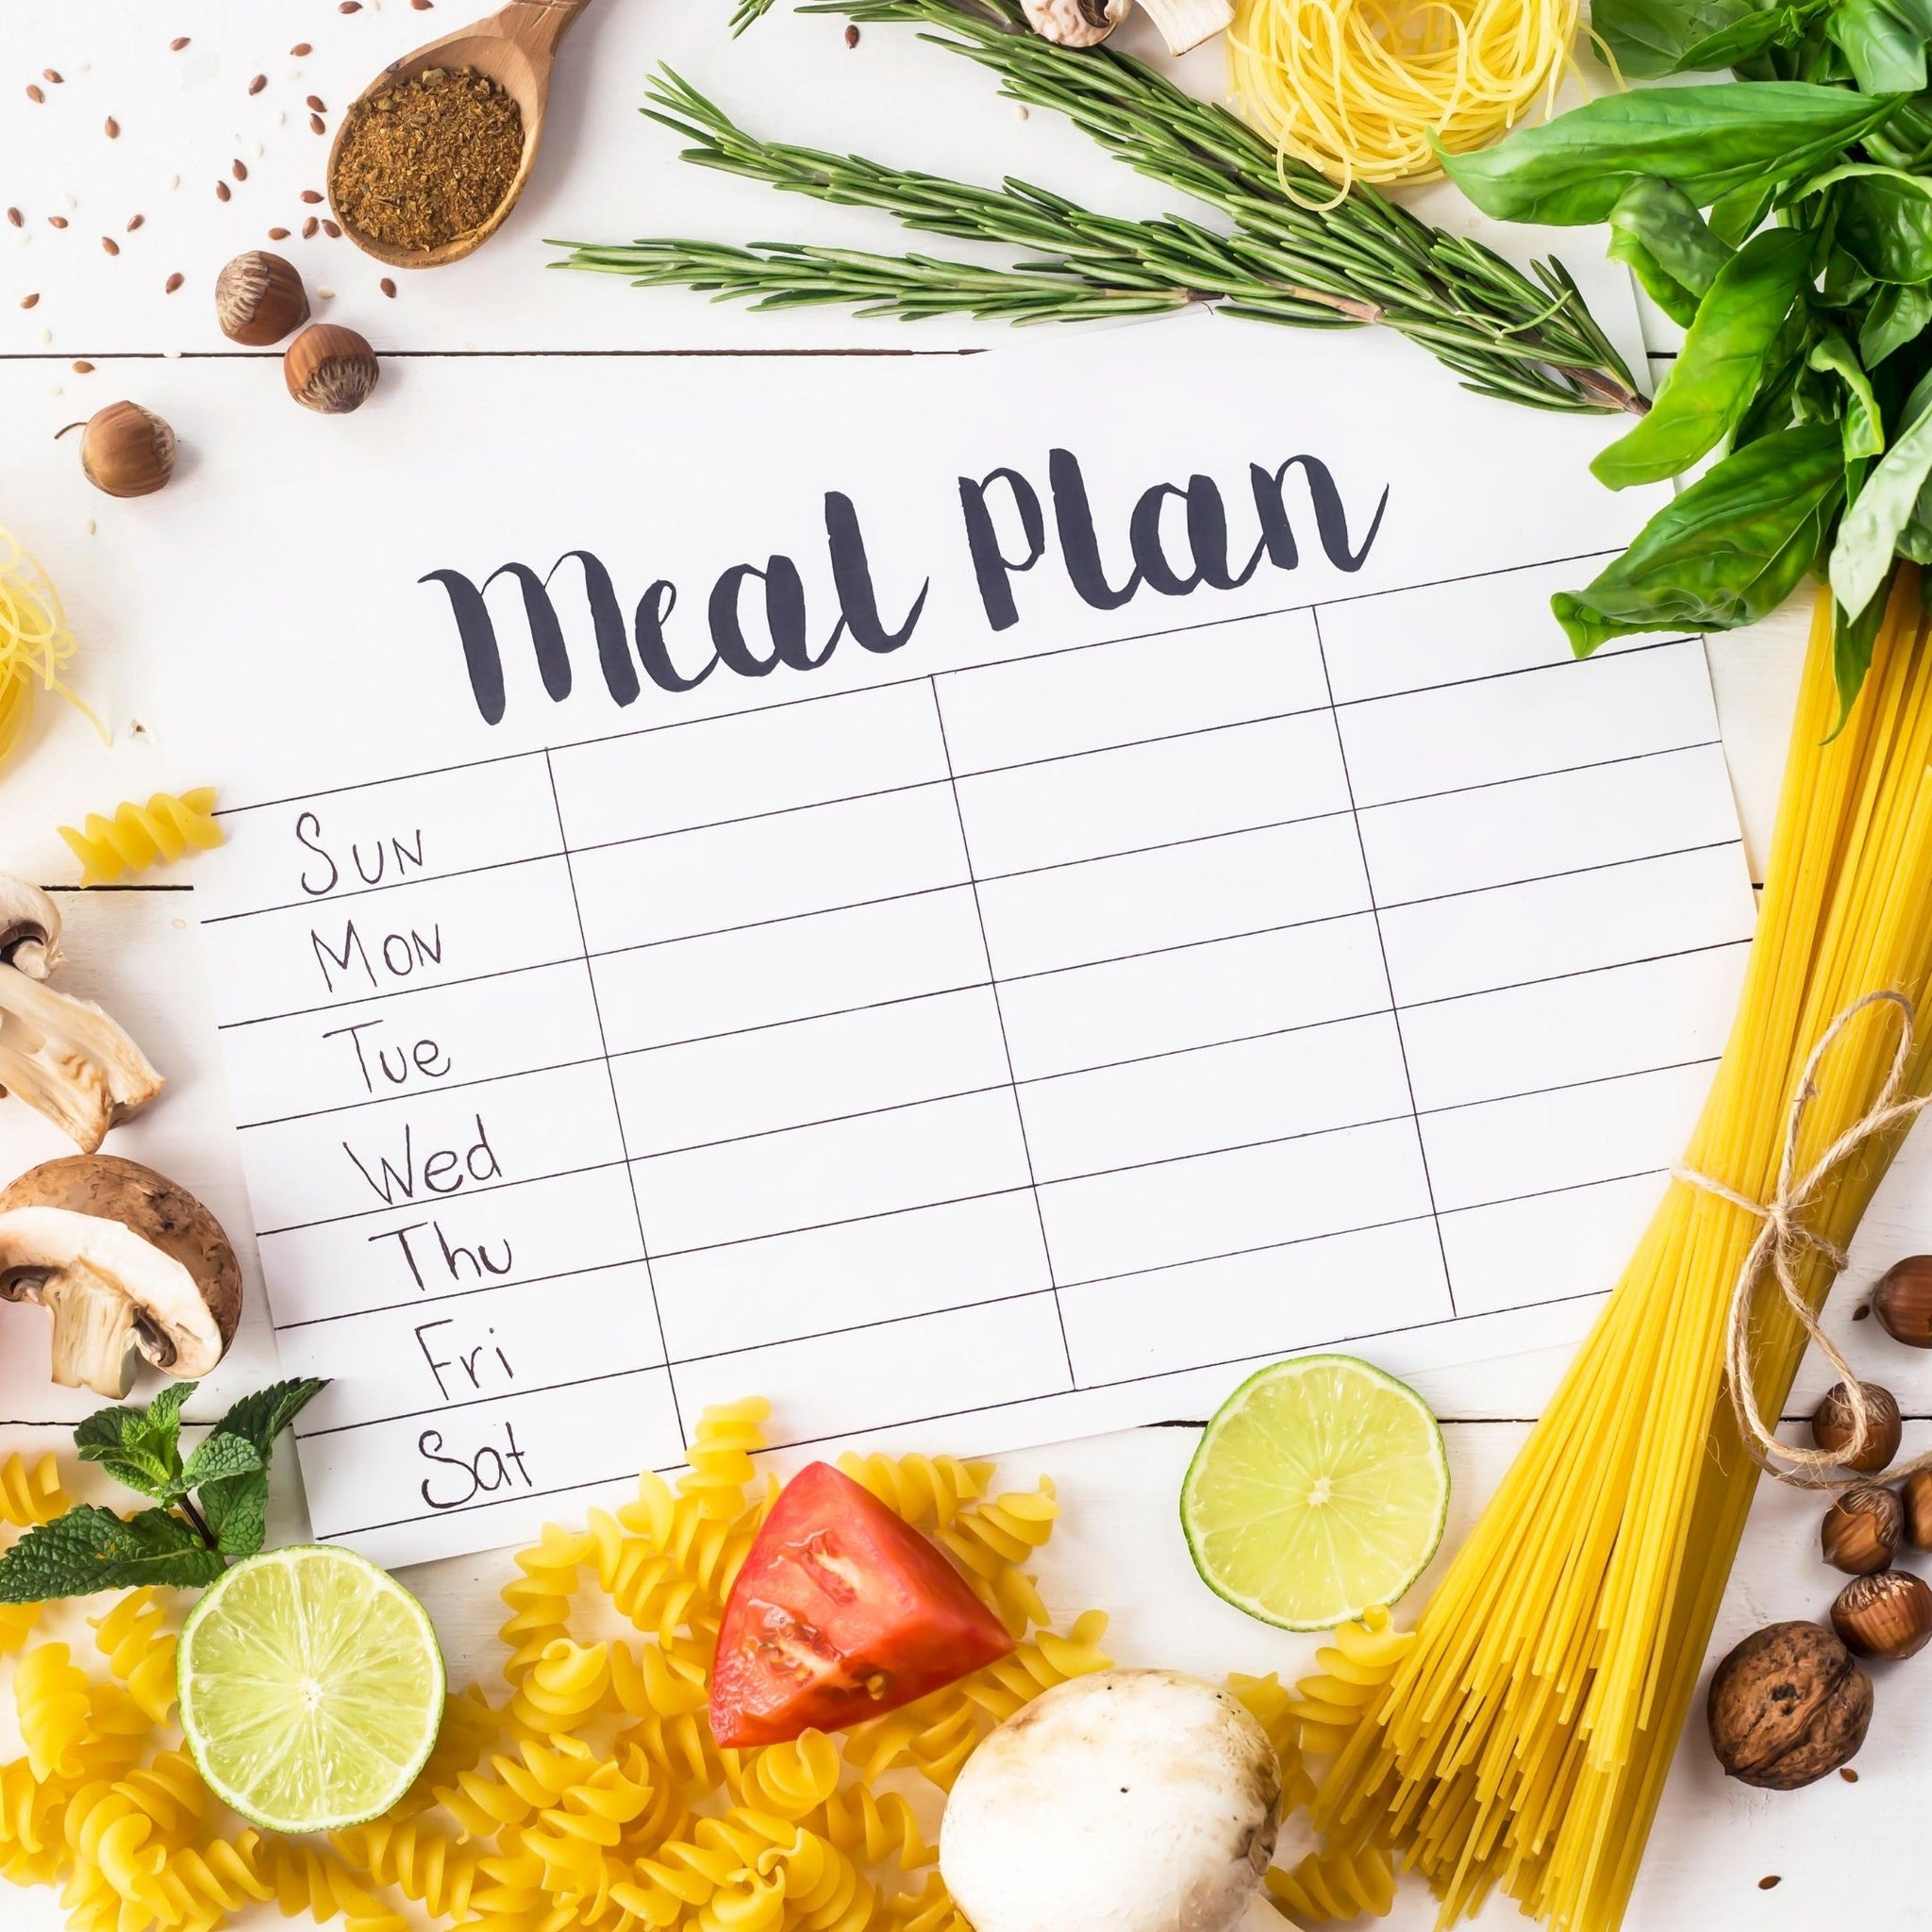 Guide to the Perfect Meal Plan